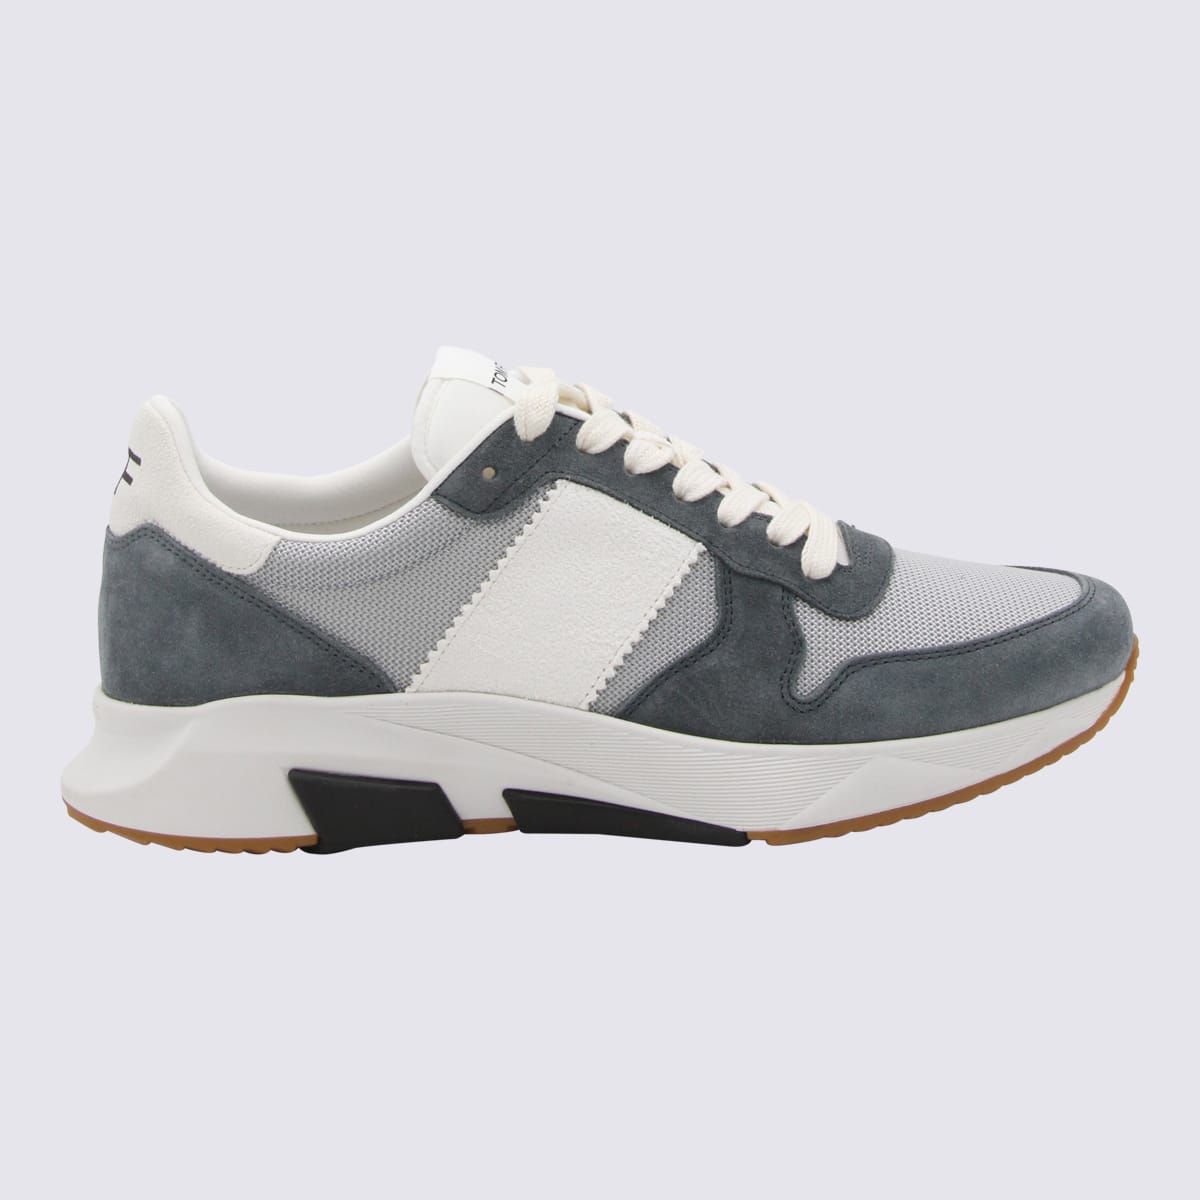 TOM FORD SIVLER AND PETROL BLUE LEATHER JAGA SNEAKERS